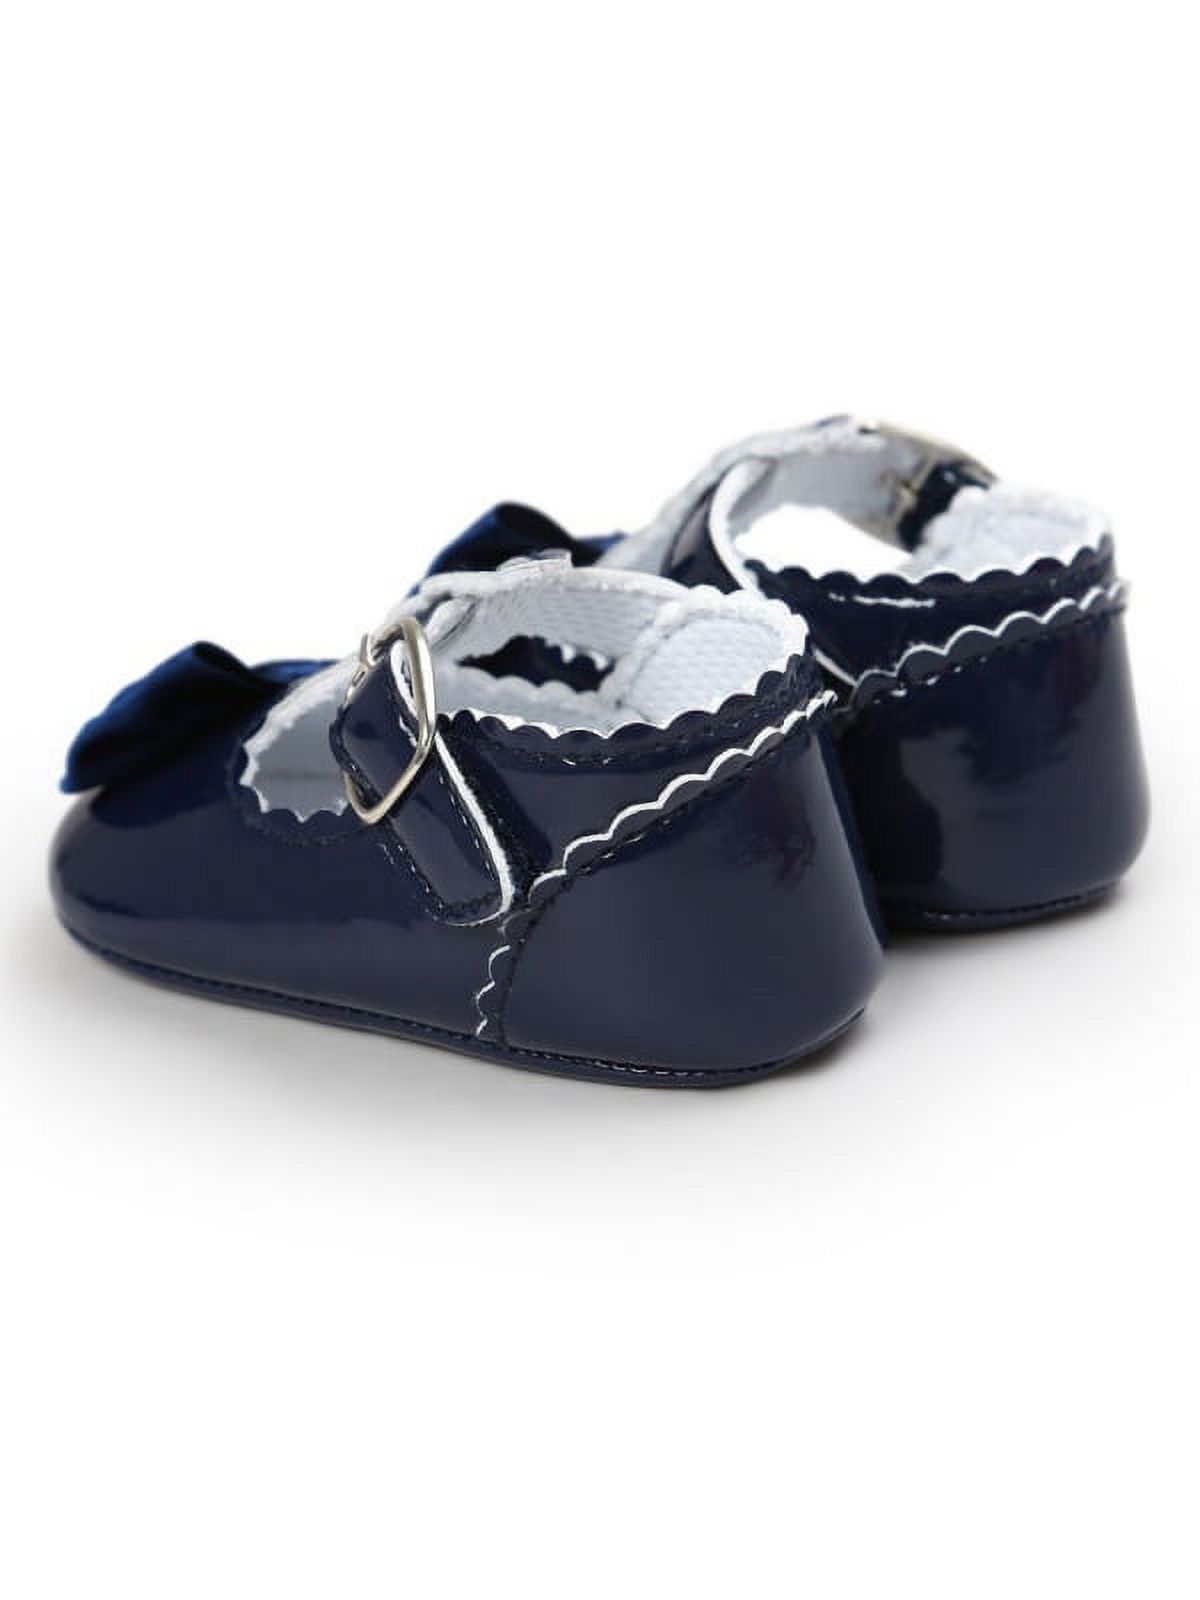 Lavaport Newborn Baby Girls Bowknot Shoes PU Leather Buckle First Walkers - image 5 of 5